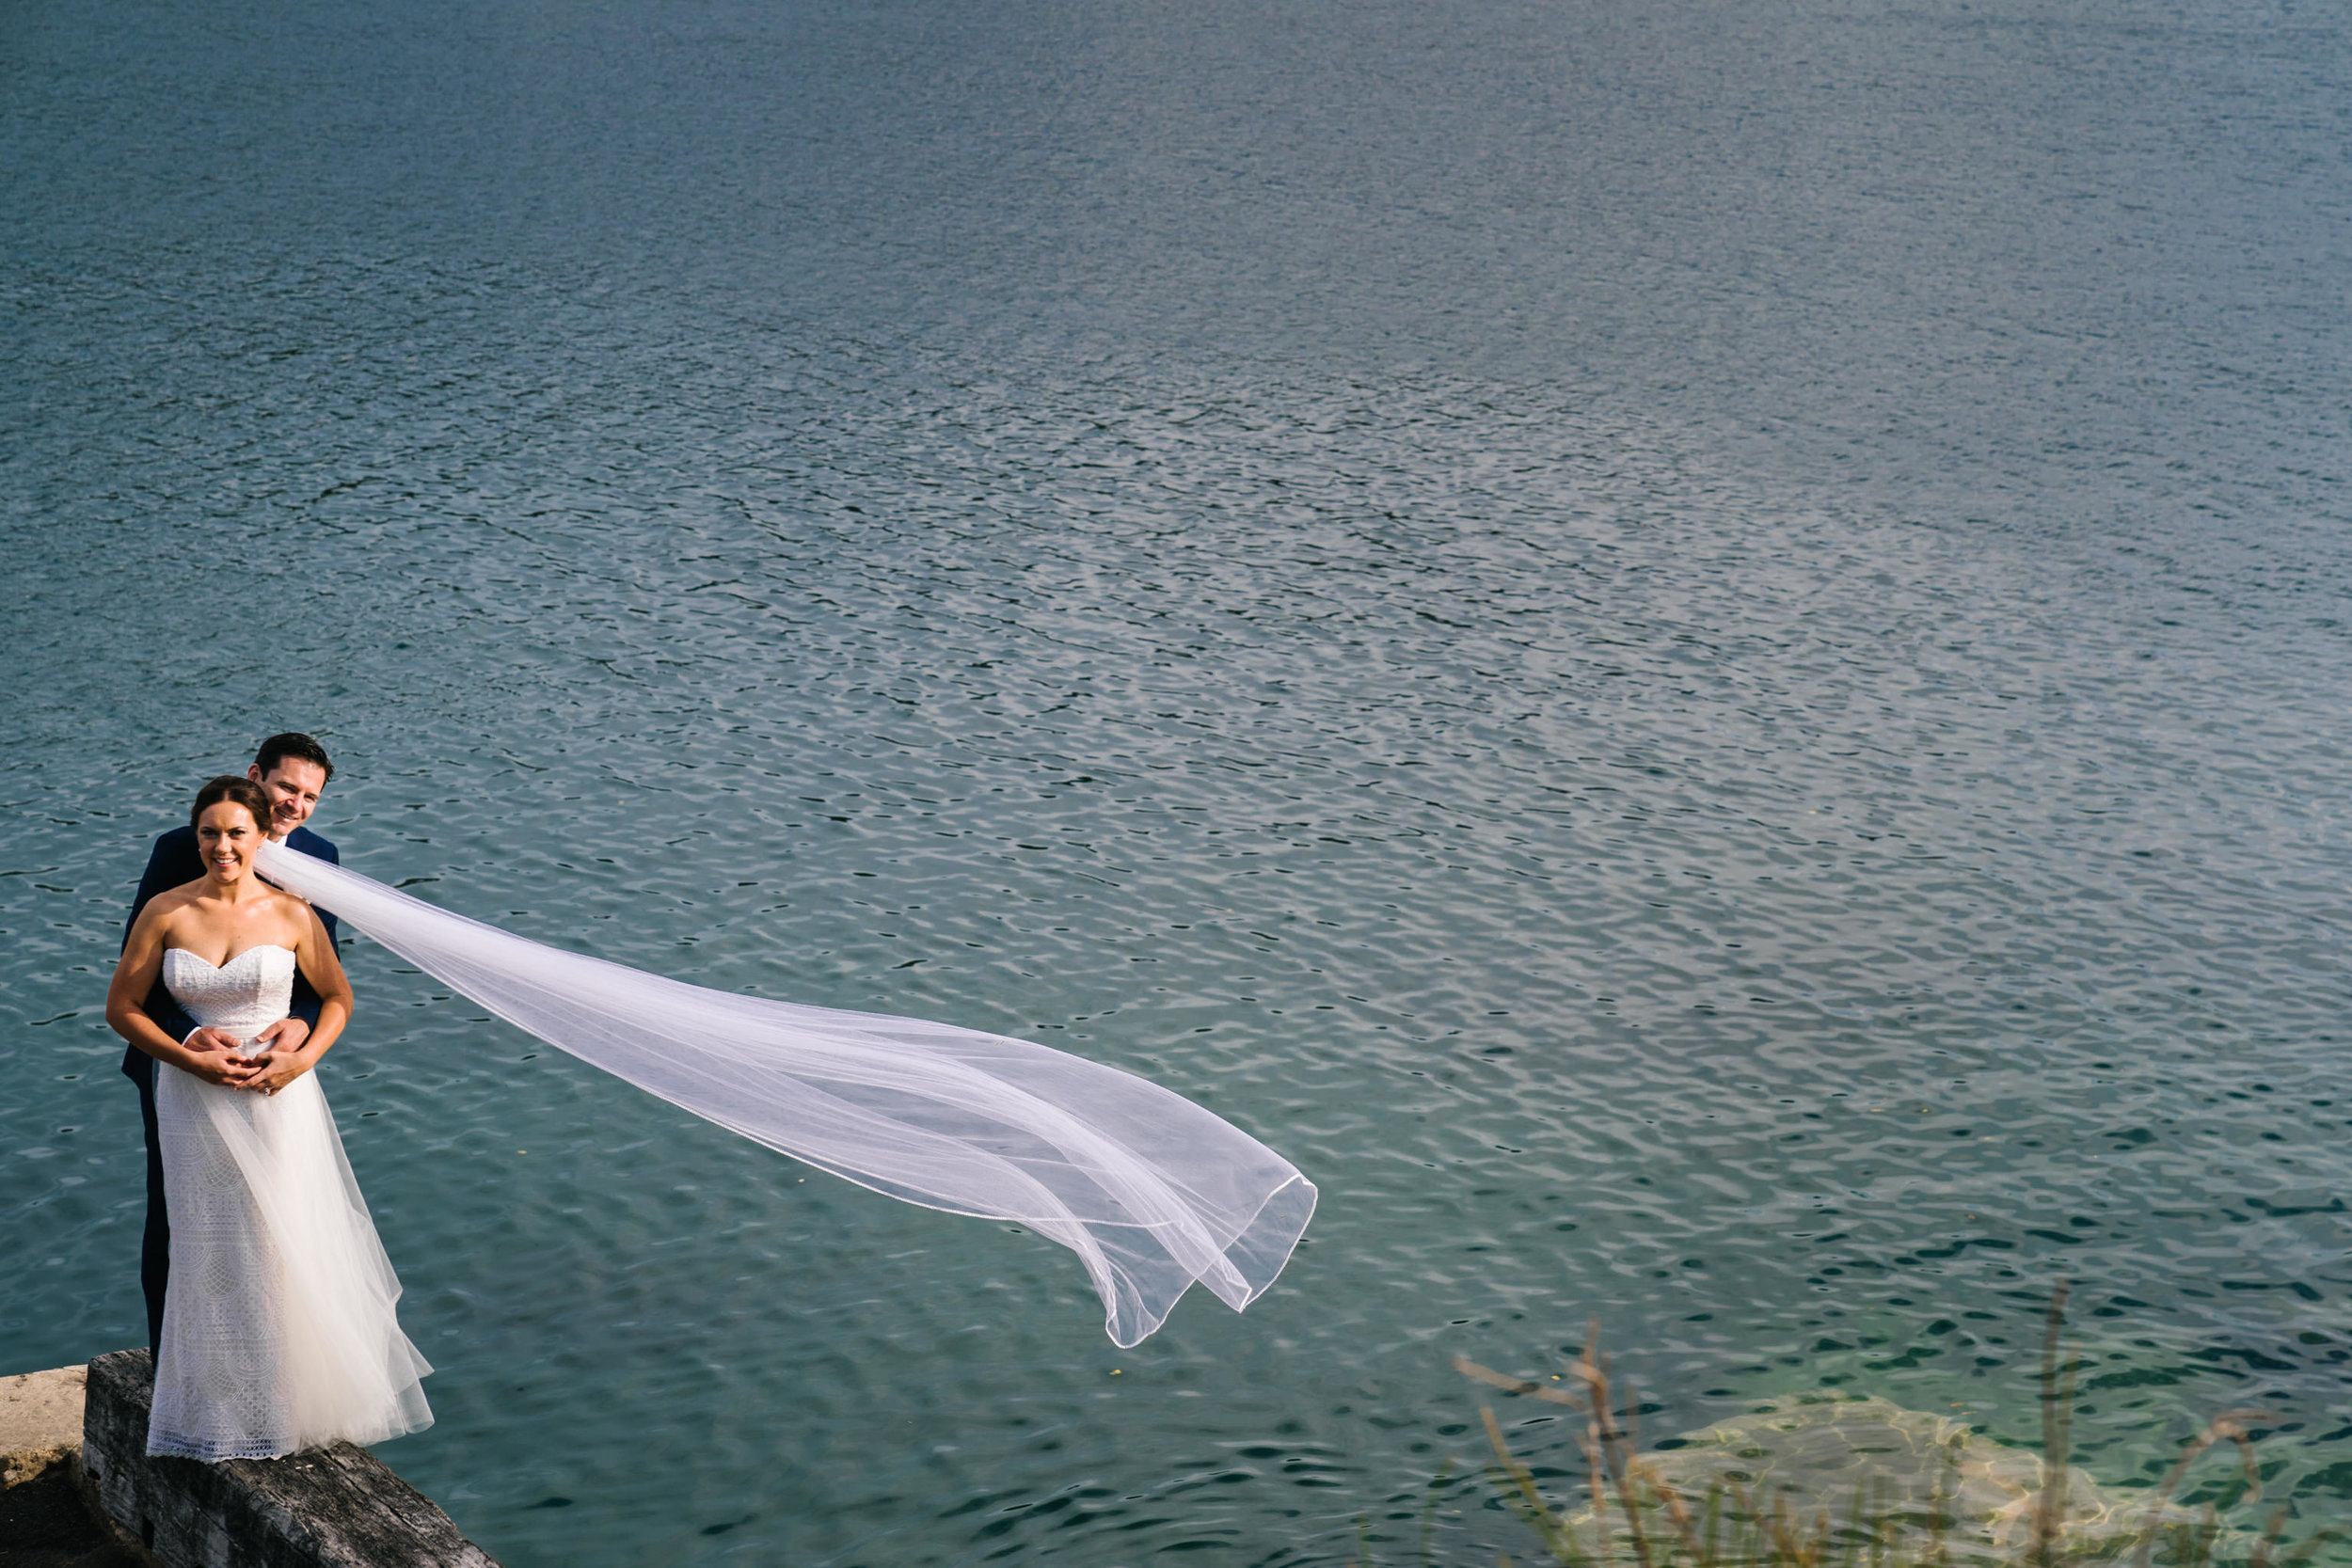 Bride's veil flowing in the wind with ocean in the backdrop